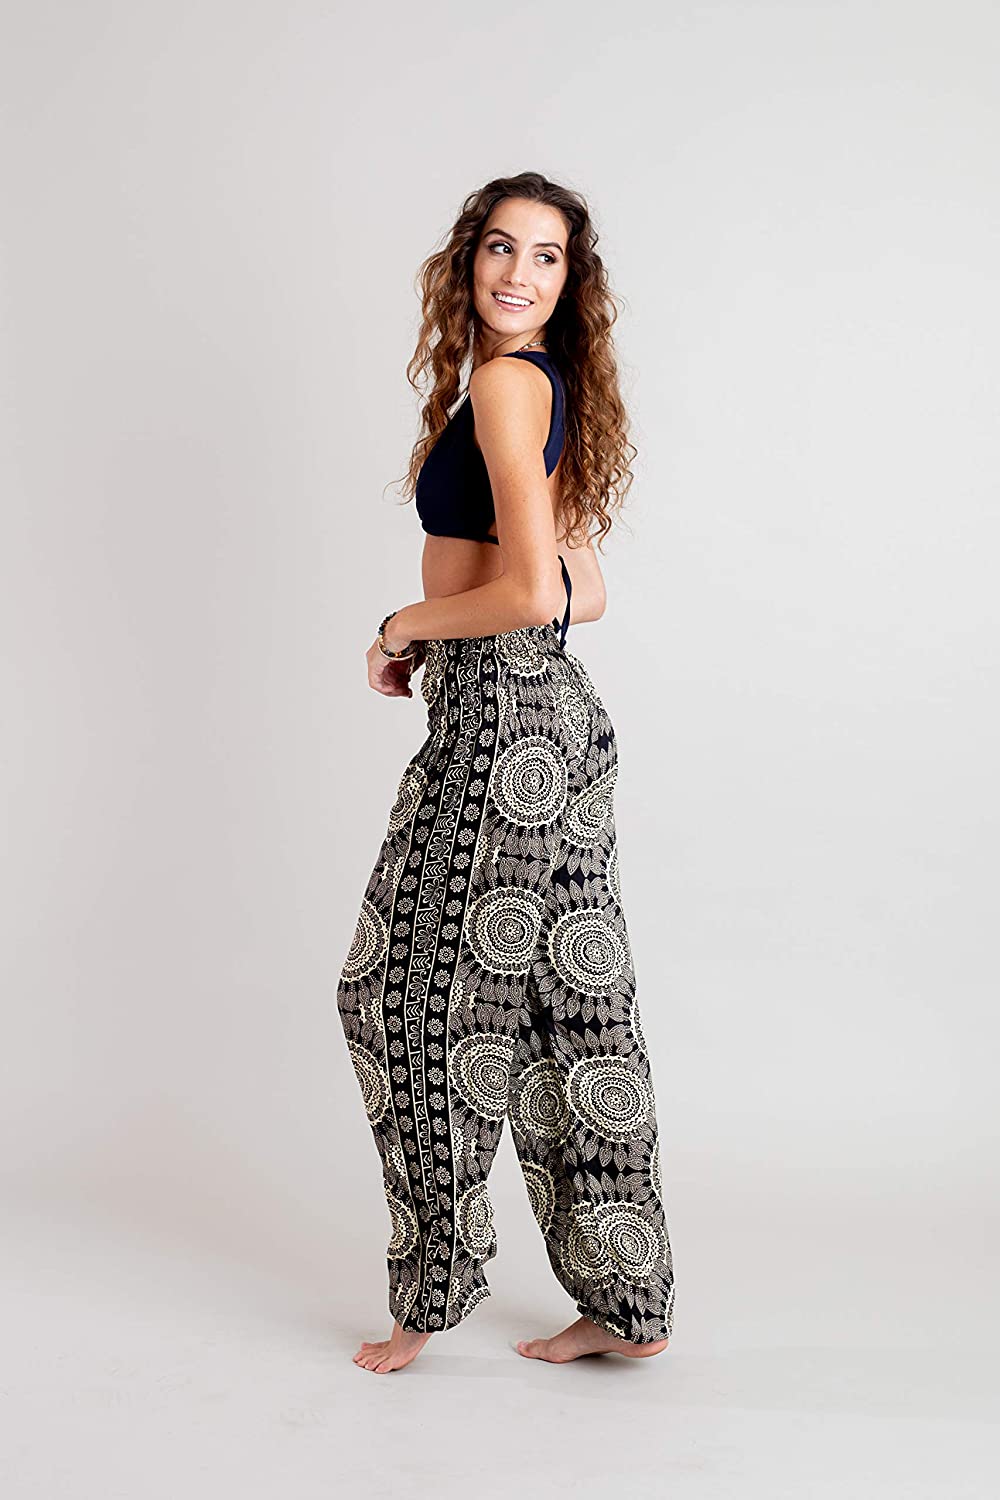 Lotus and Luna Casual and Comfy Flowy Boho Pants for Women Perfect for ...